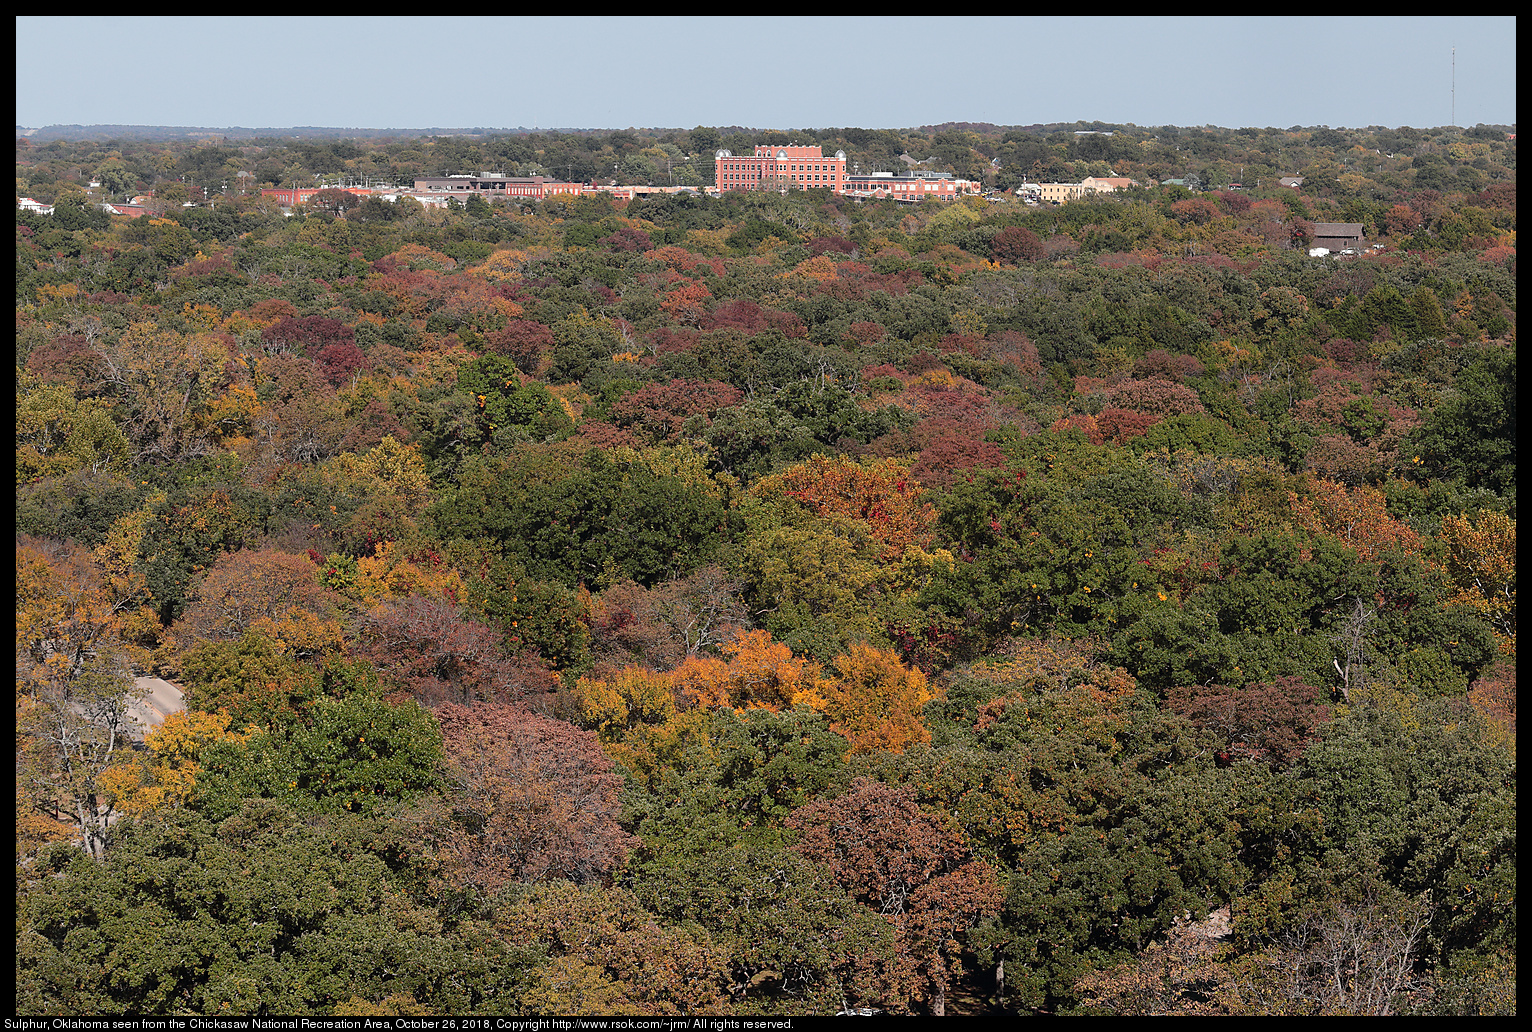 Bromide Hill overlook in the Chickasaw National Recreation Area